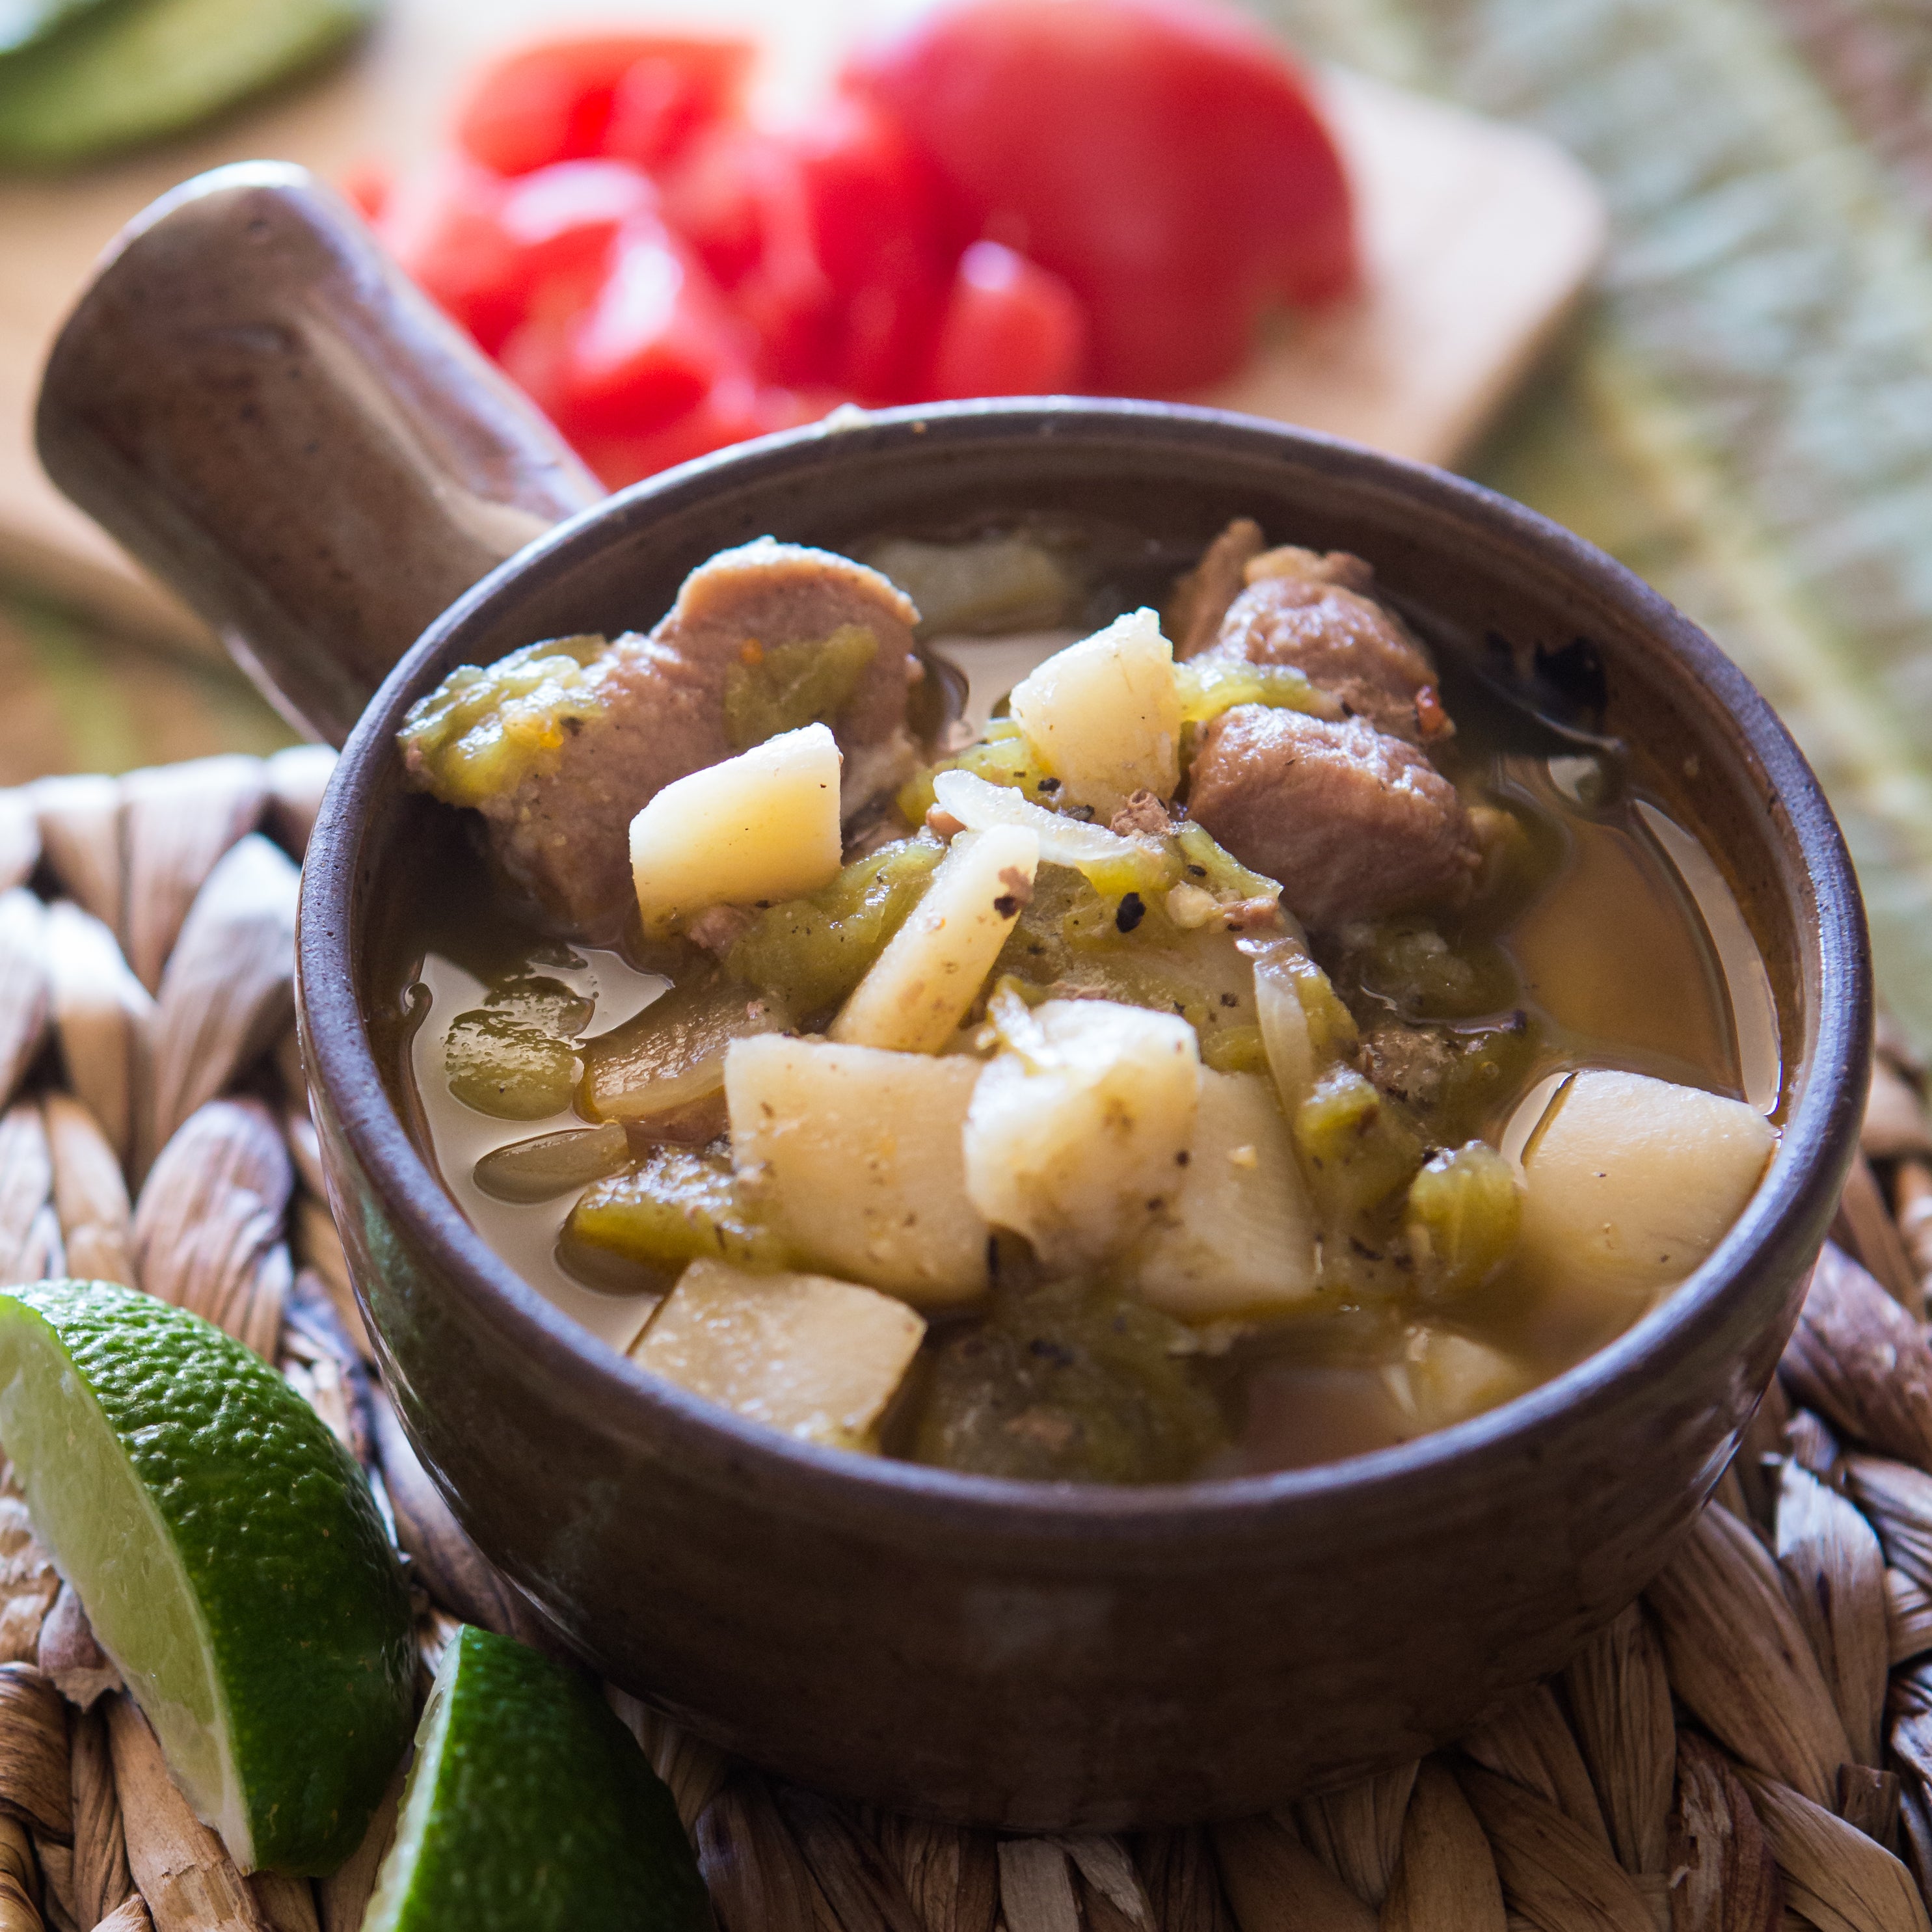 A bowl of traditional Green Chile Stew with chunks of meat and potatoes, garnished with lime wedges, served on a woven mat with tomatoes in the background.